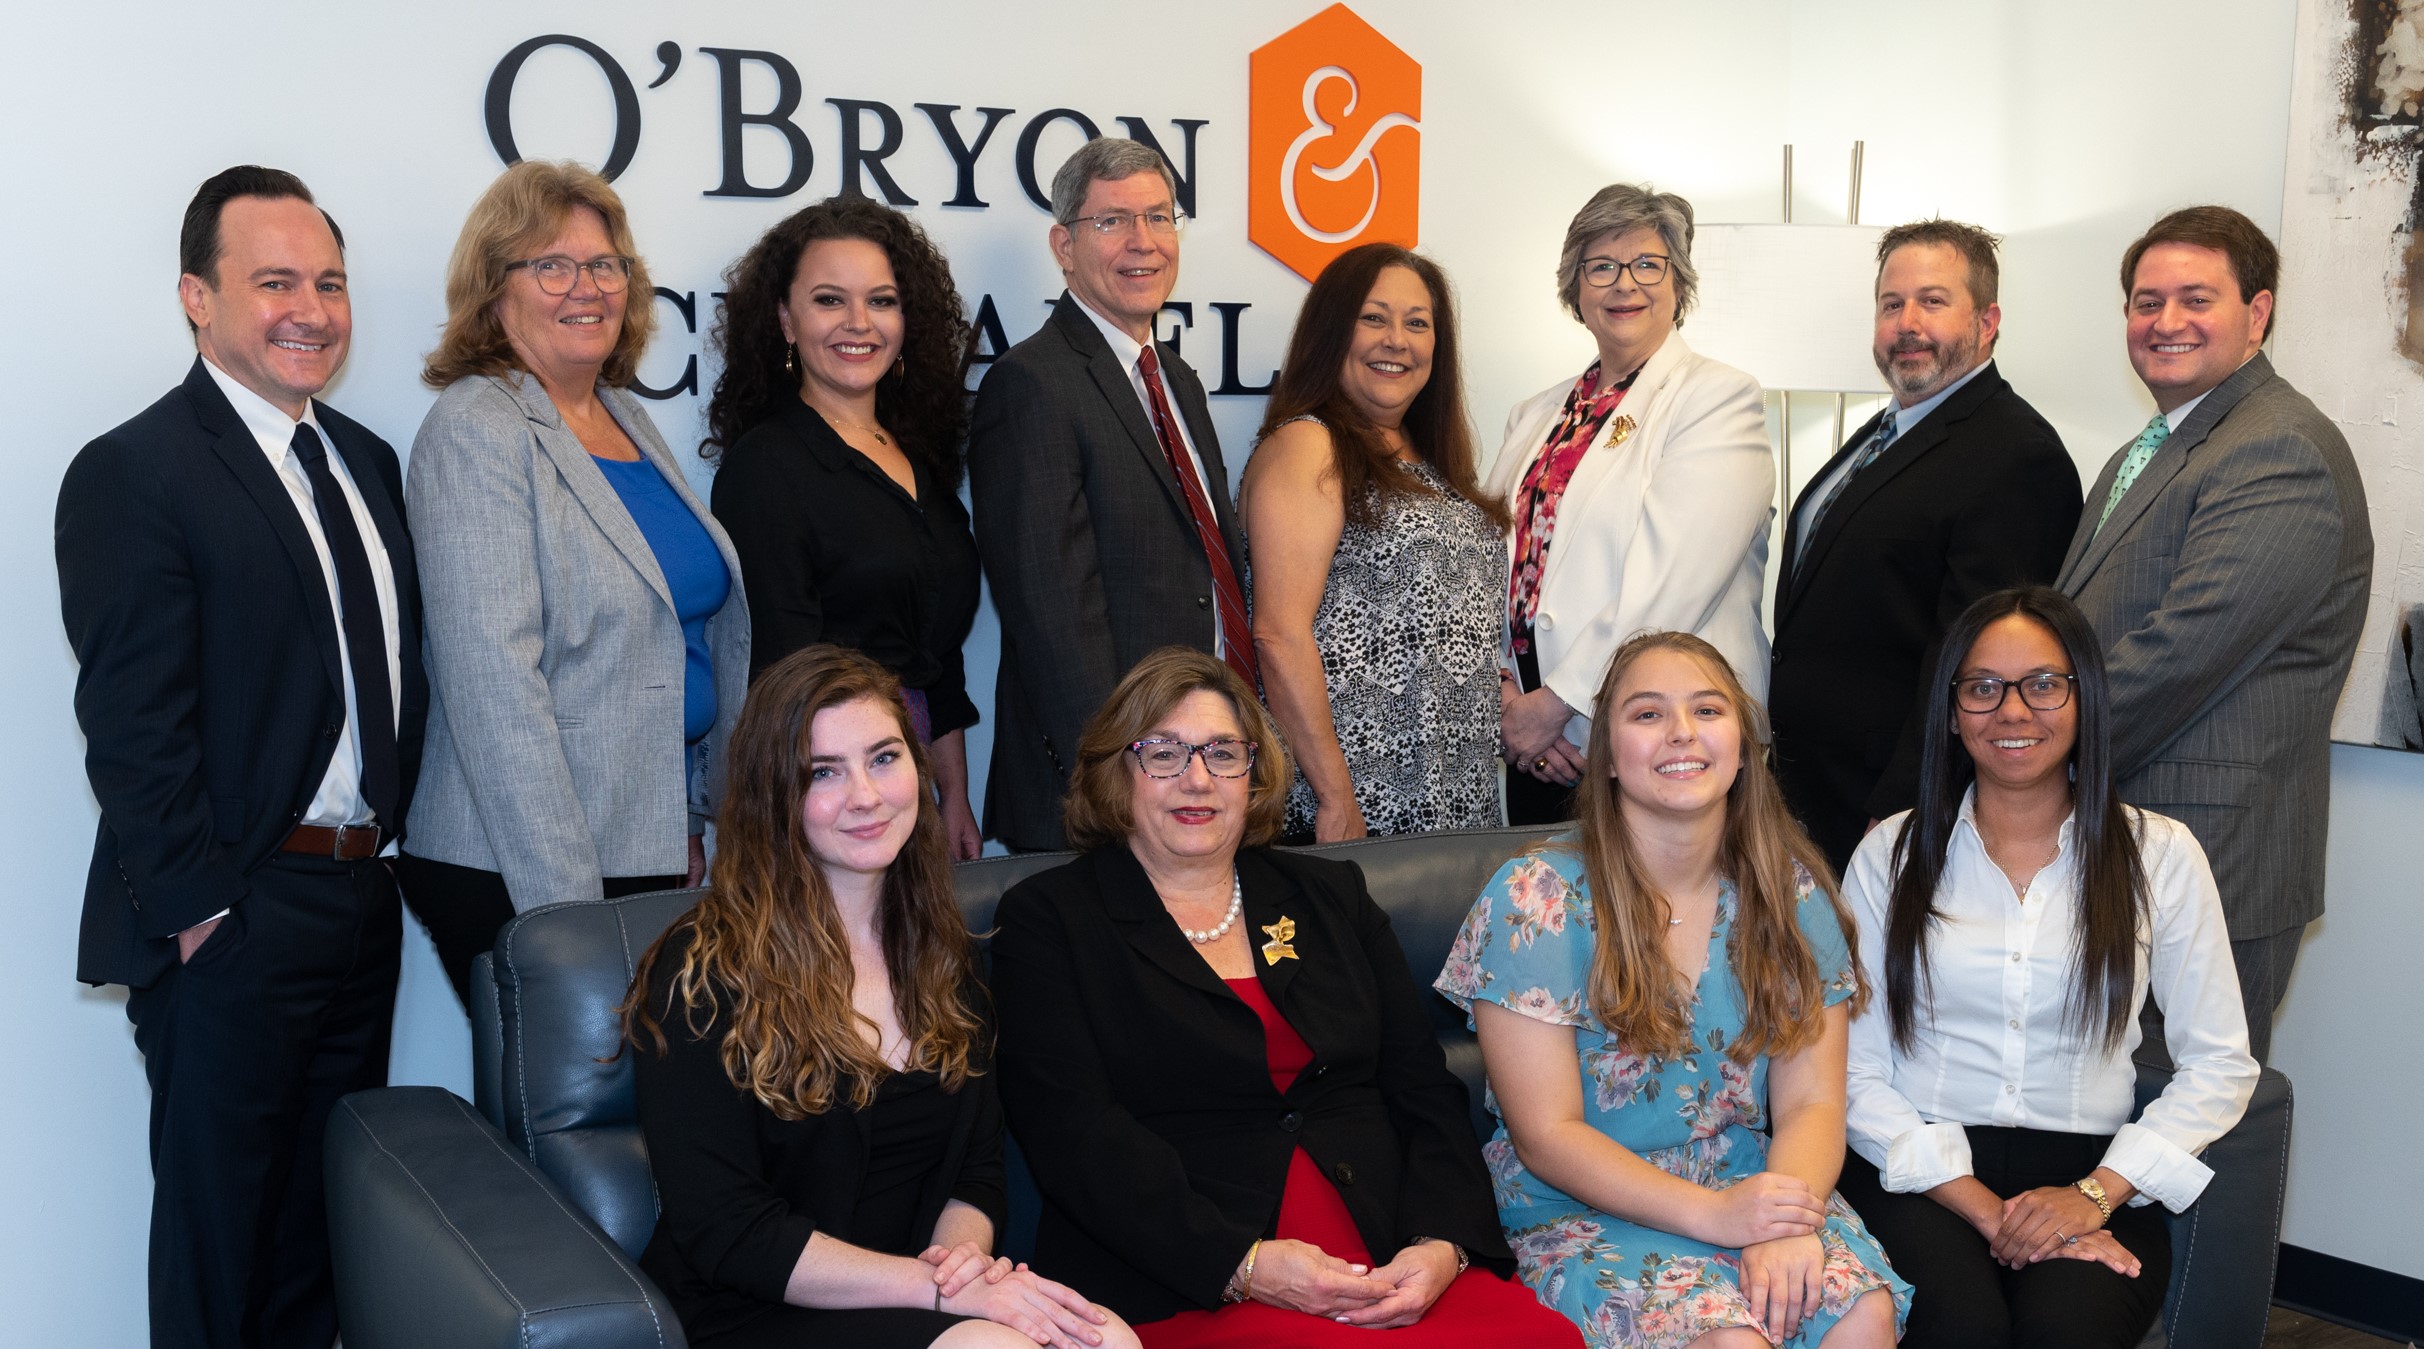 The O'Bryon & Schnabel Team